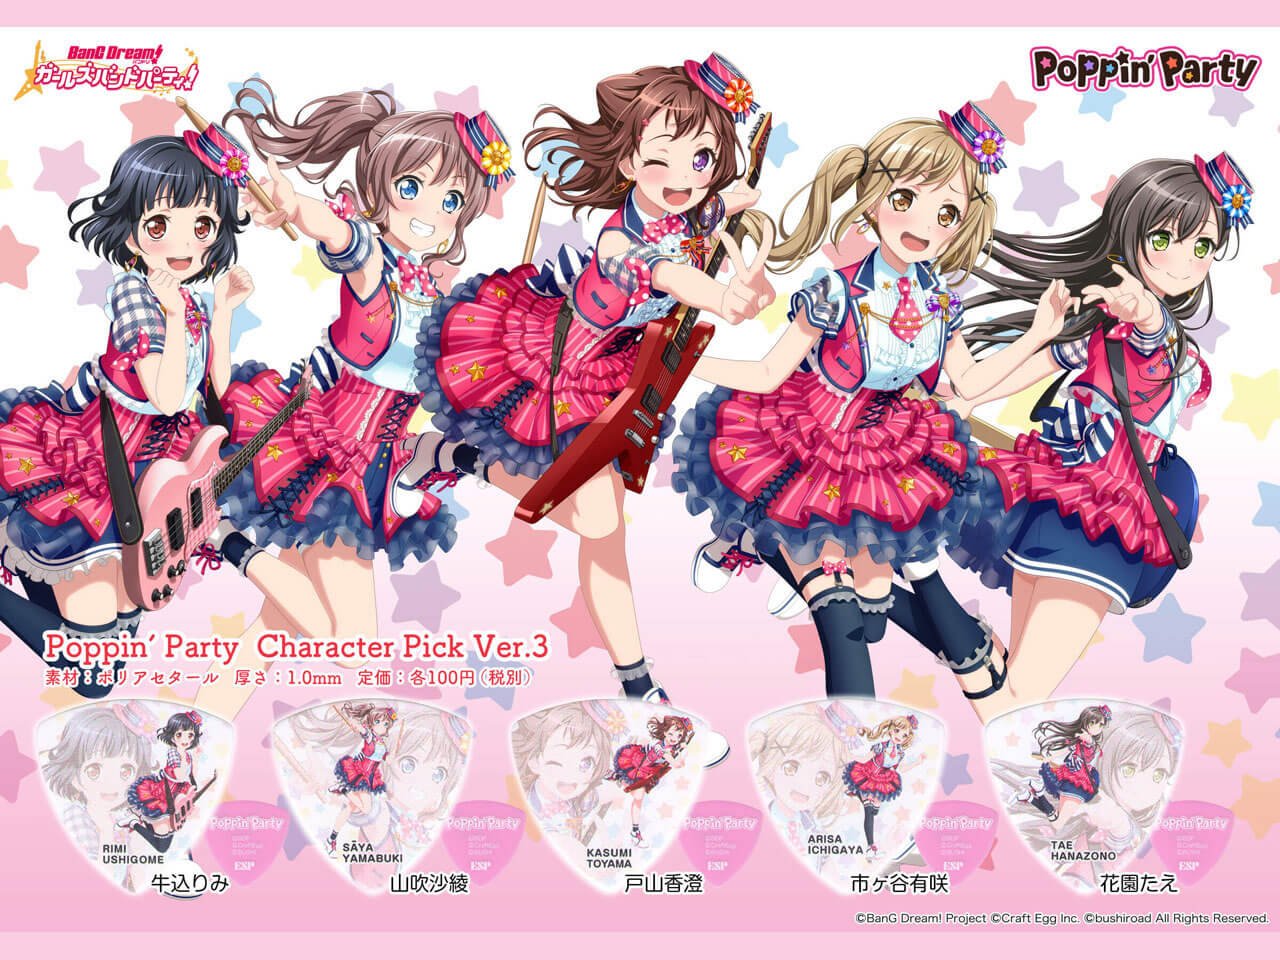 【ESP×BanG Dream!コラボピック】Poppin’Party Character Pick Ver.3 "牛込りみ"（GBP Rimi Poppin Party 3）＆”ハメパチ” セット